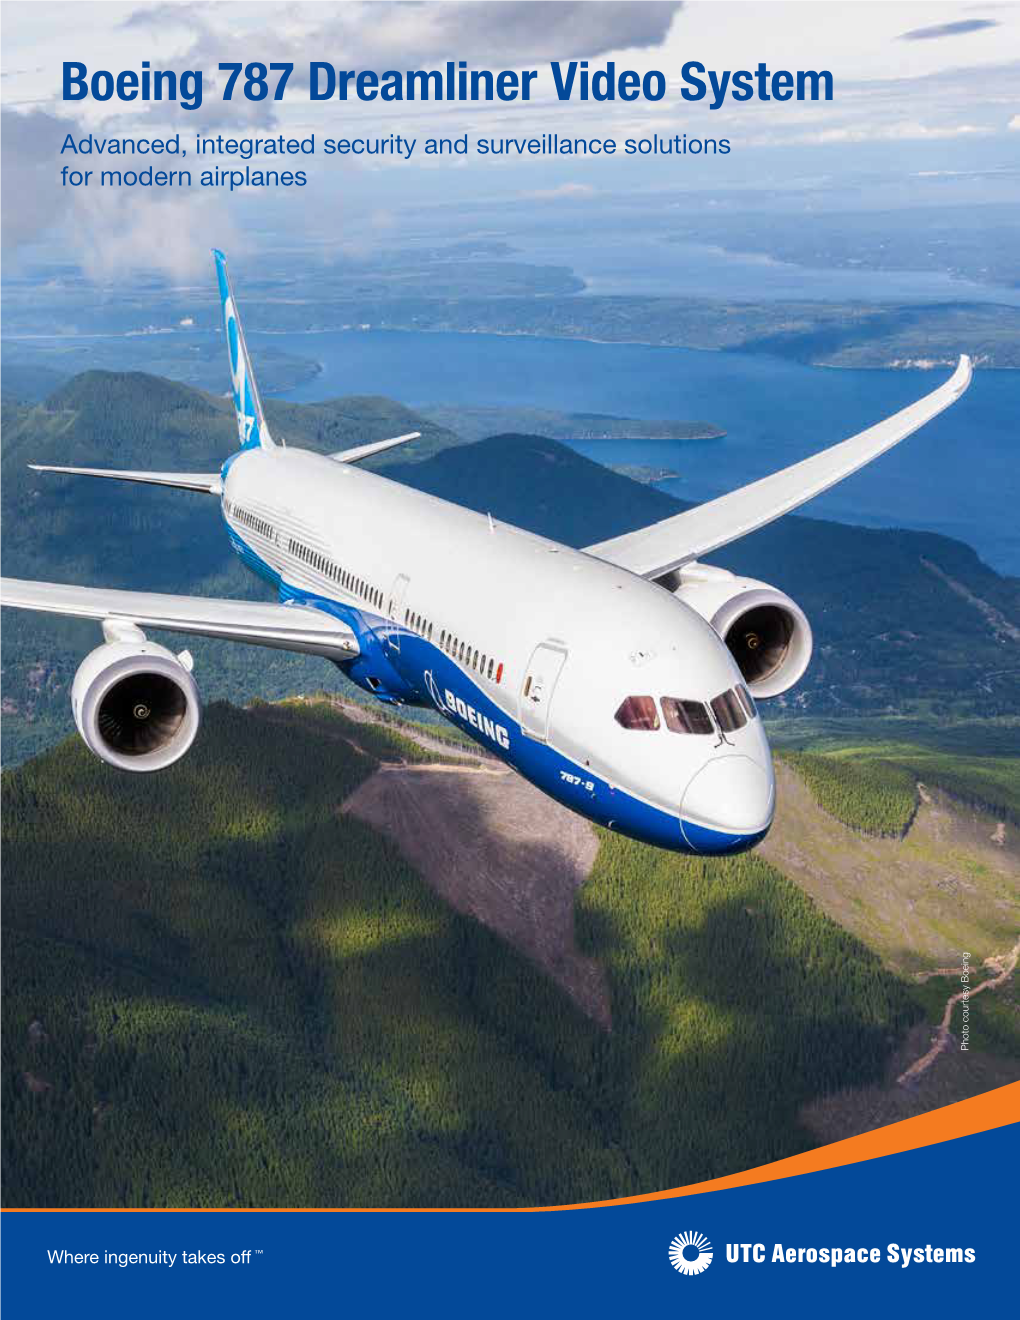 Boeing 787 Dreamliner Video System Advanced, Integrated Security and Surveillance Solutions for Modern Airplanes Photo Courtesy Boeing